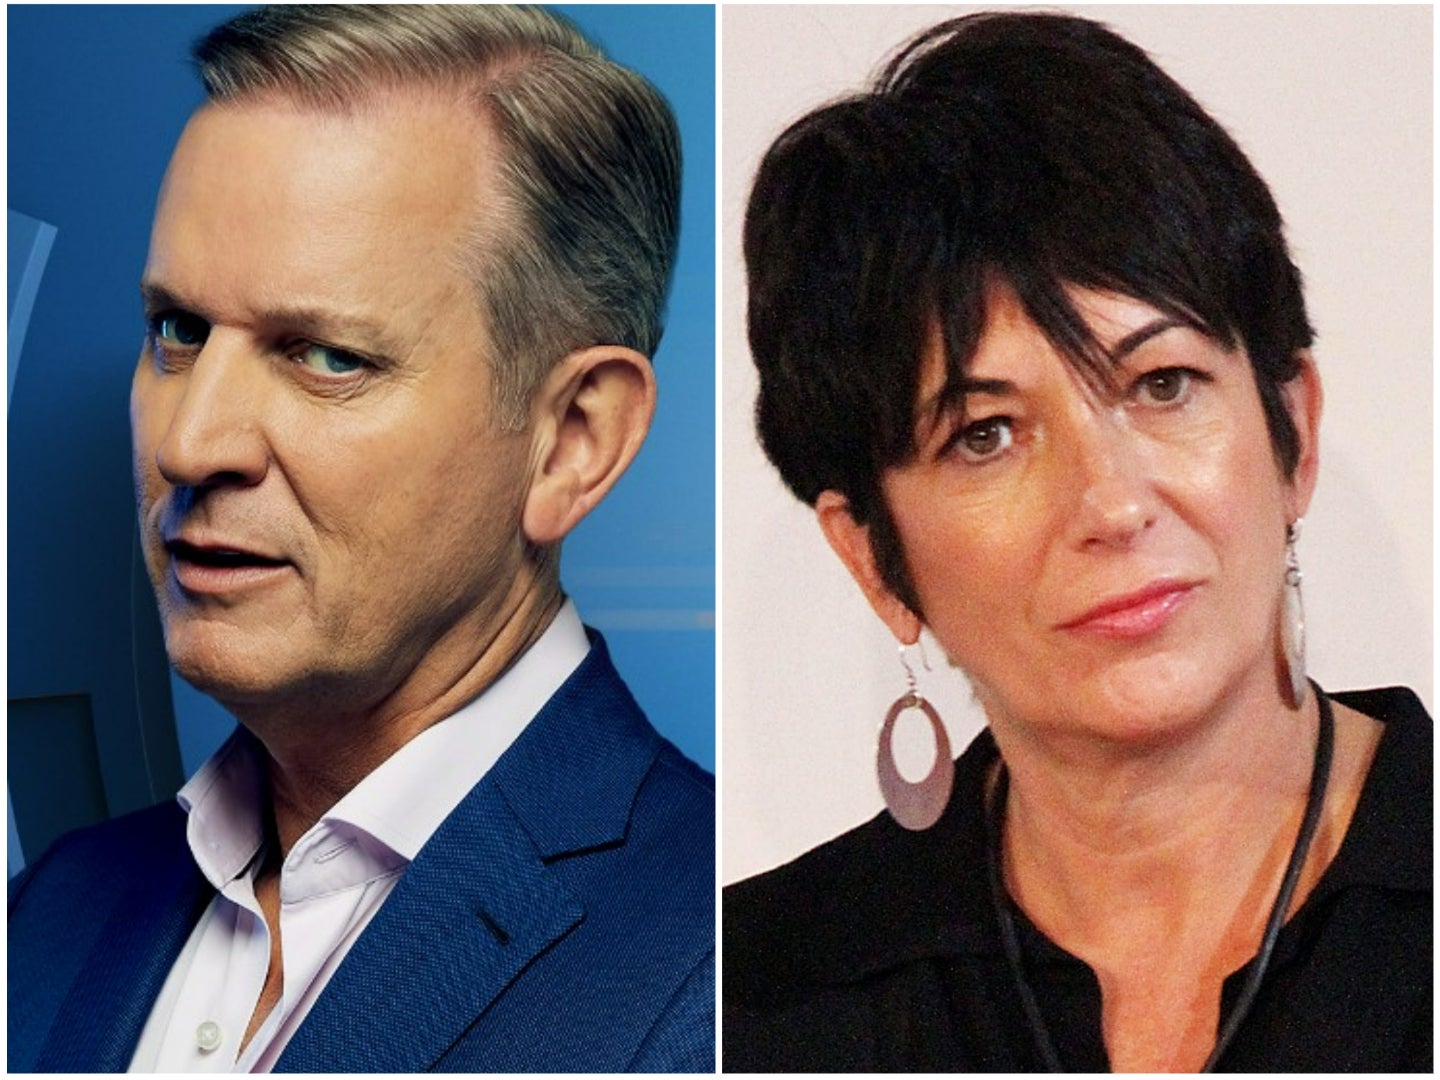 Jeremy Kyle and Ghislaine Maxwell